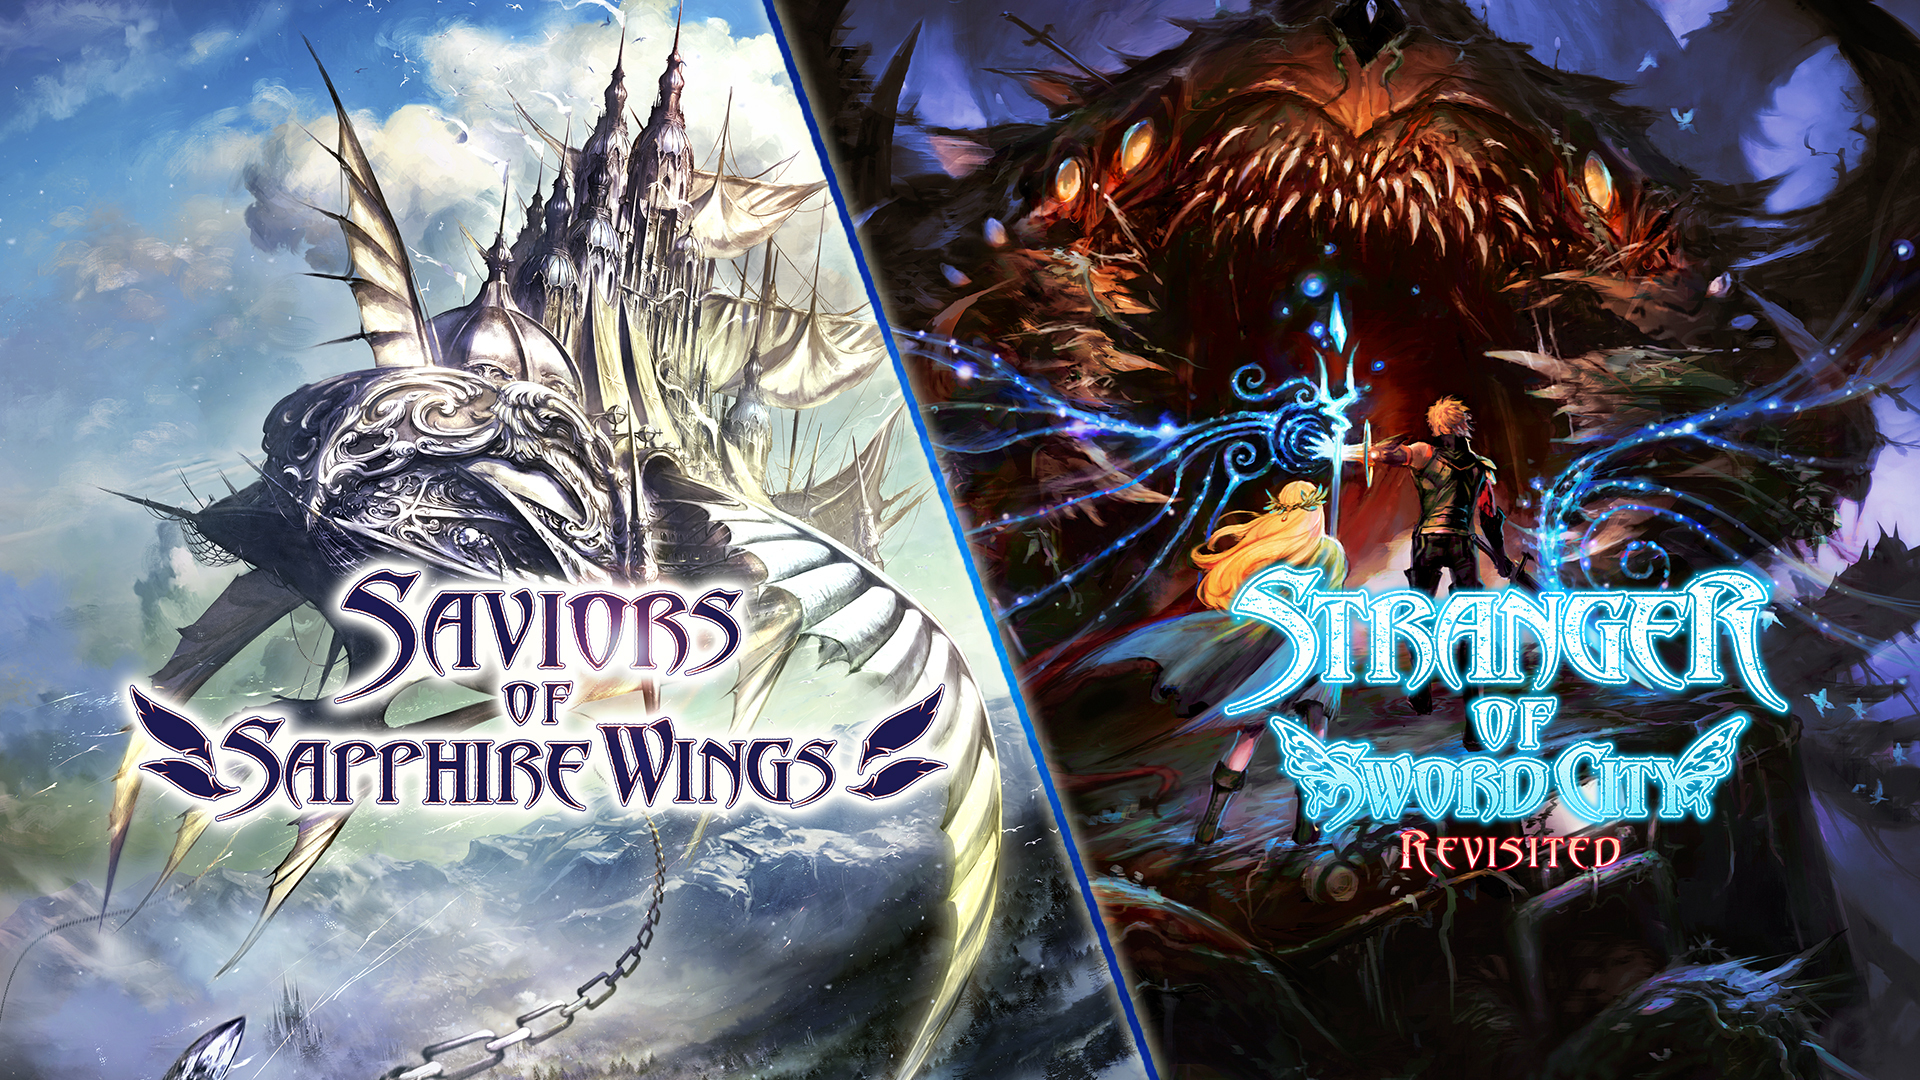 Saviors of Sapphire Wings & Stranger of Sword City Revisited